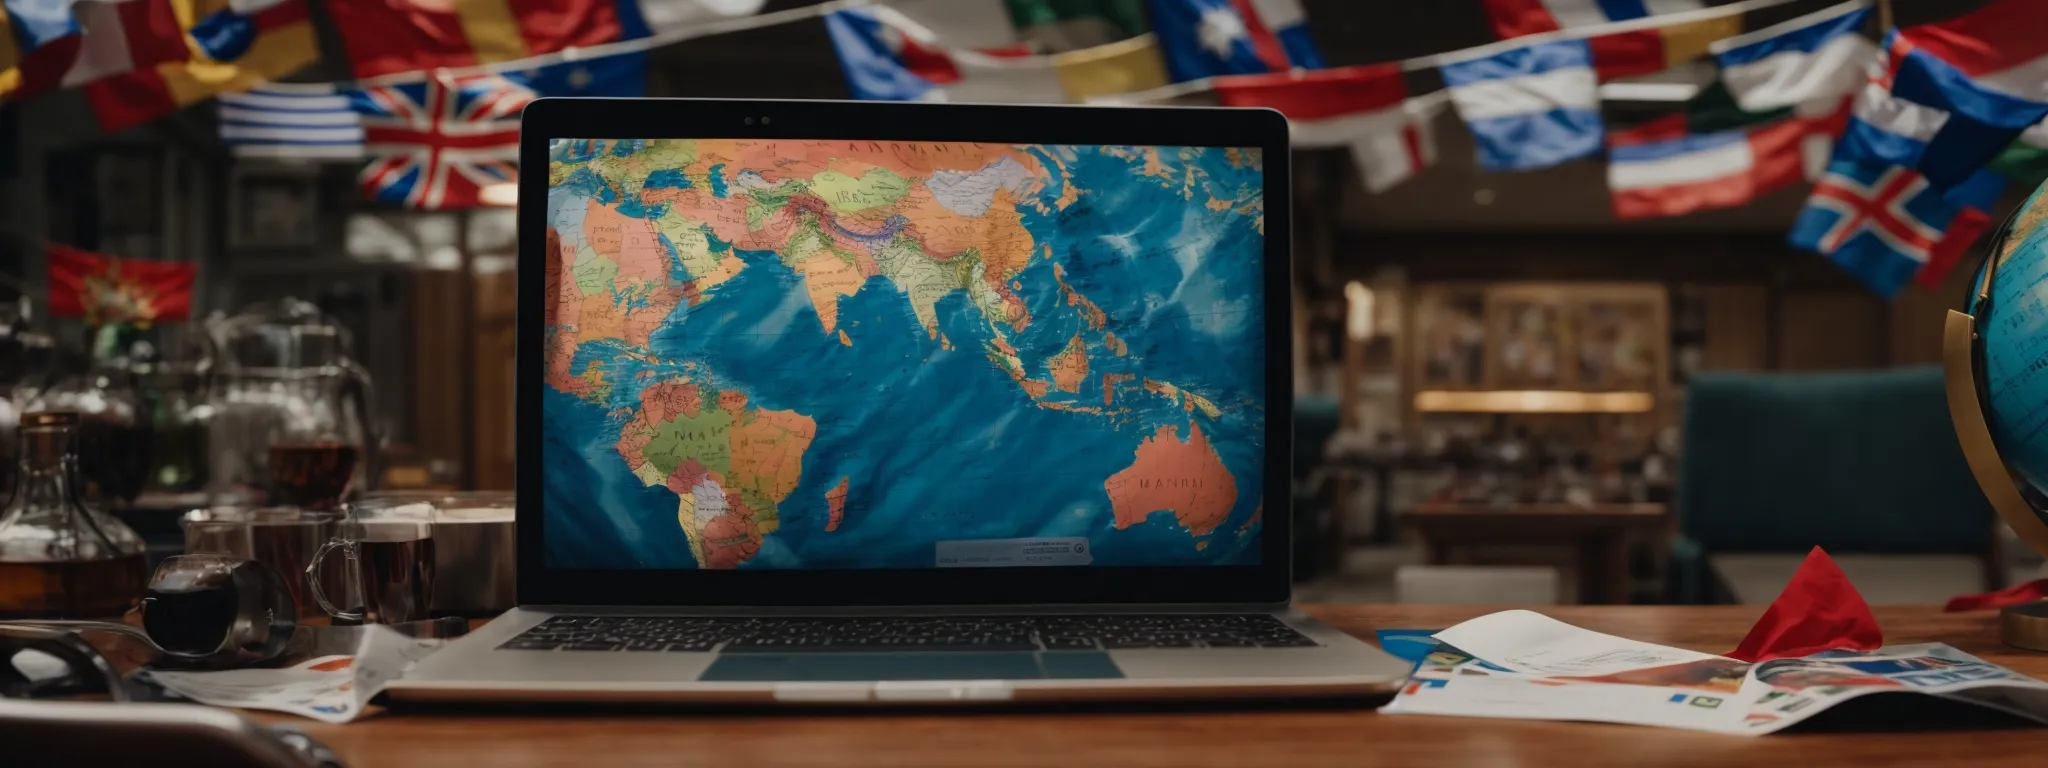 a globe centered on an open laptop with flags of various countries peeking in the background.